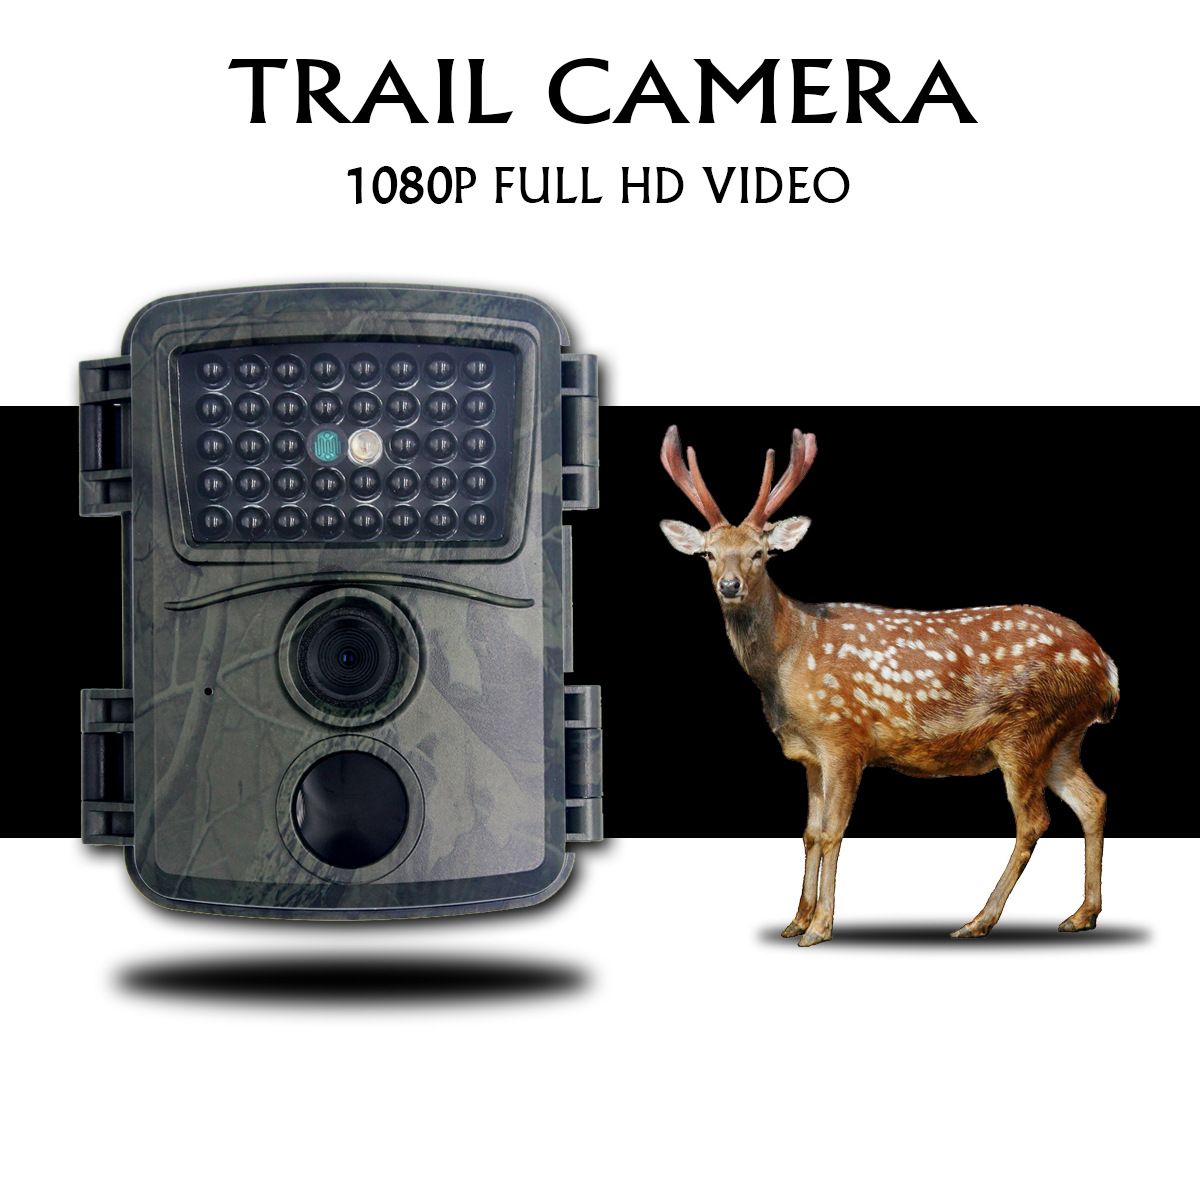 PR600A-12MP-1080P-Night-Vision-Waterproof-Hunting-Camera-08s-Trigger-Time-Recorder-Wildlife-Trail-Ca-1722816